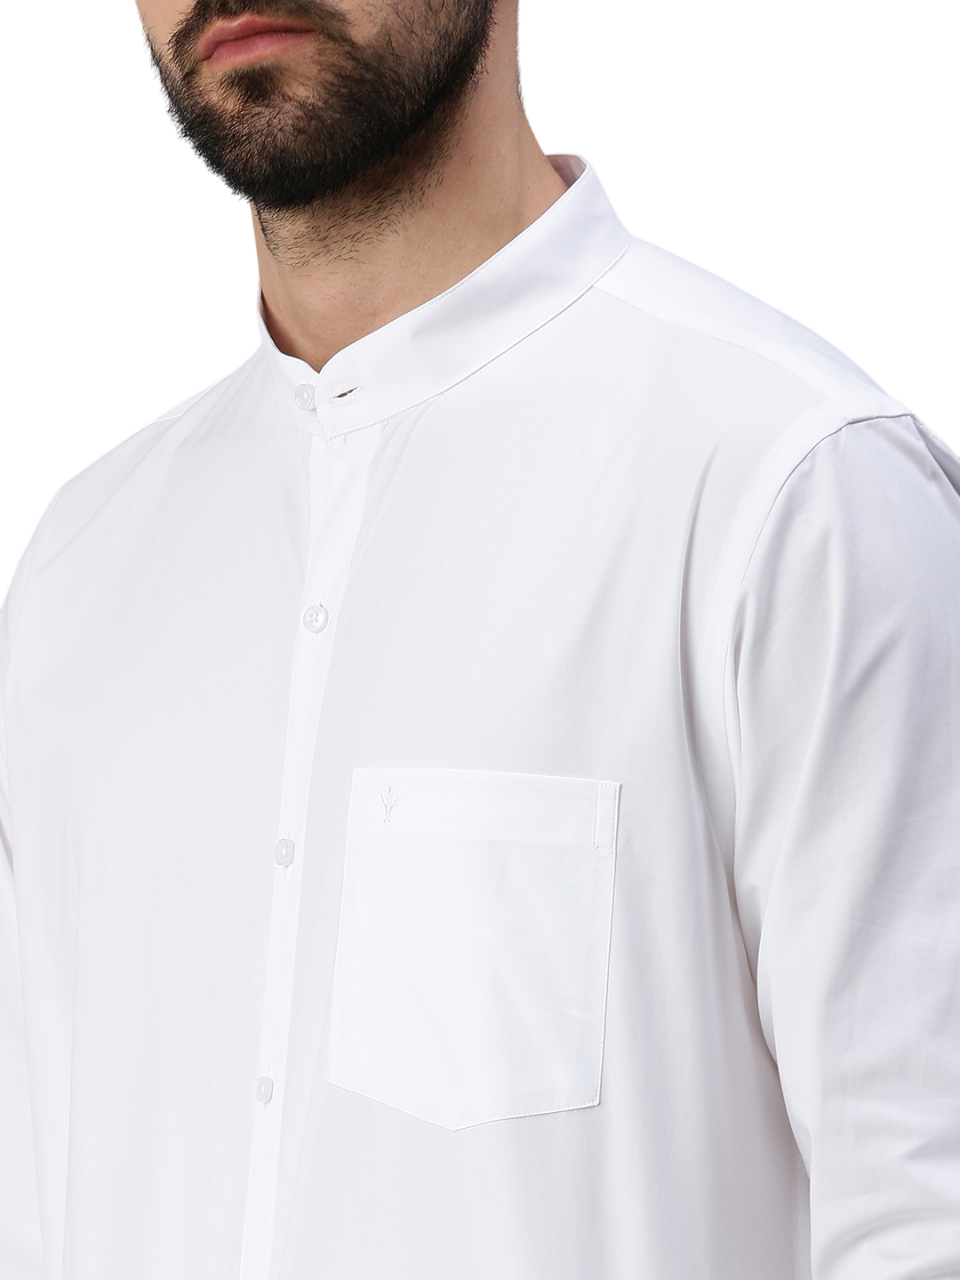 Mens 100% Cotton White Shirt Full Sleeves Chinese Collar-Zoom view